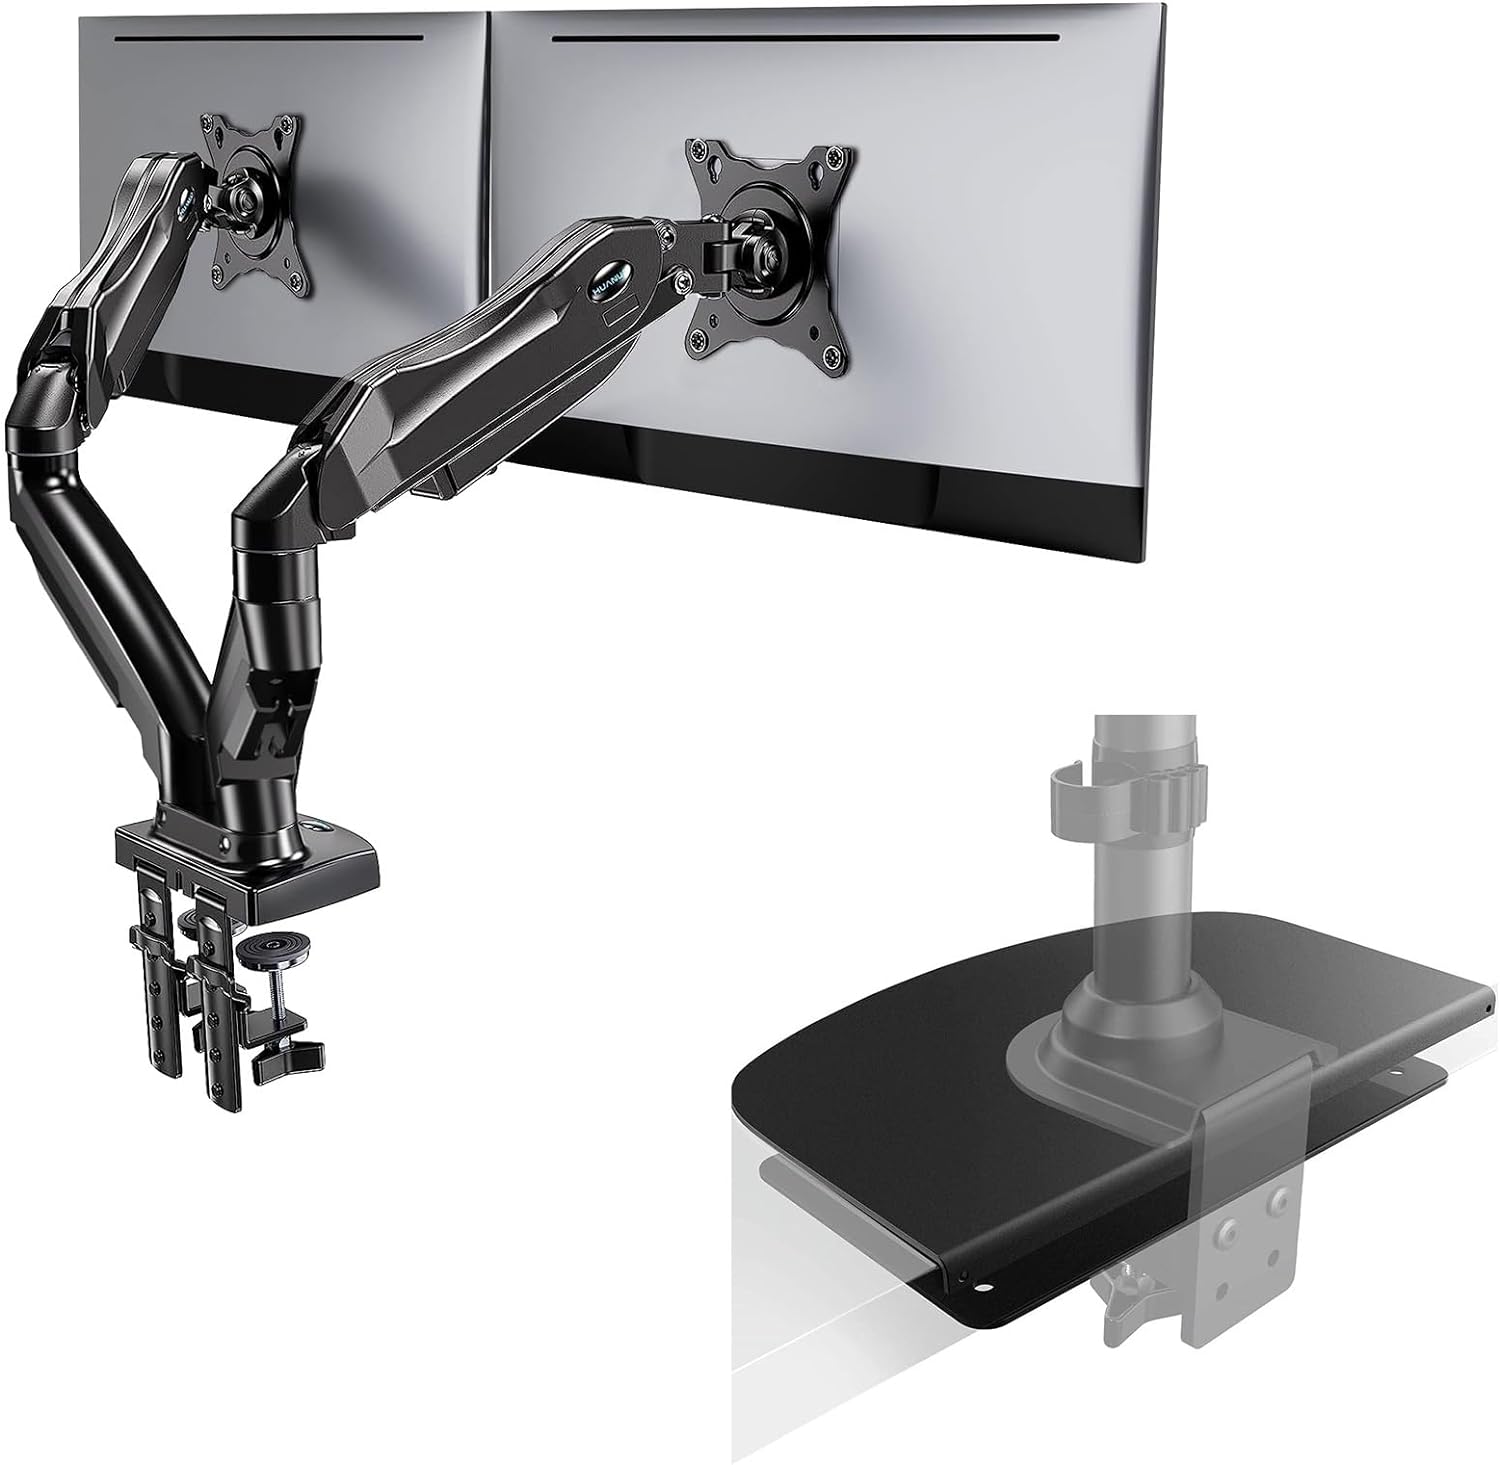 HUANUO Bundle  2 Items: HUANUO Dual Monitor Stand for 17 to 27 inch Monitor and Steel Monitor Mount Reinforcement Plate for Thin, Glass and Other Fragile Tabletop